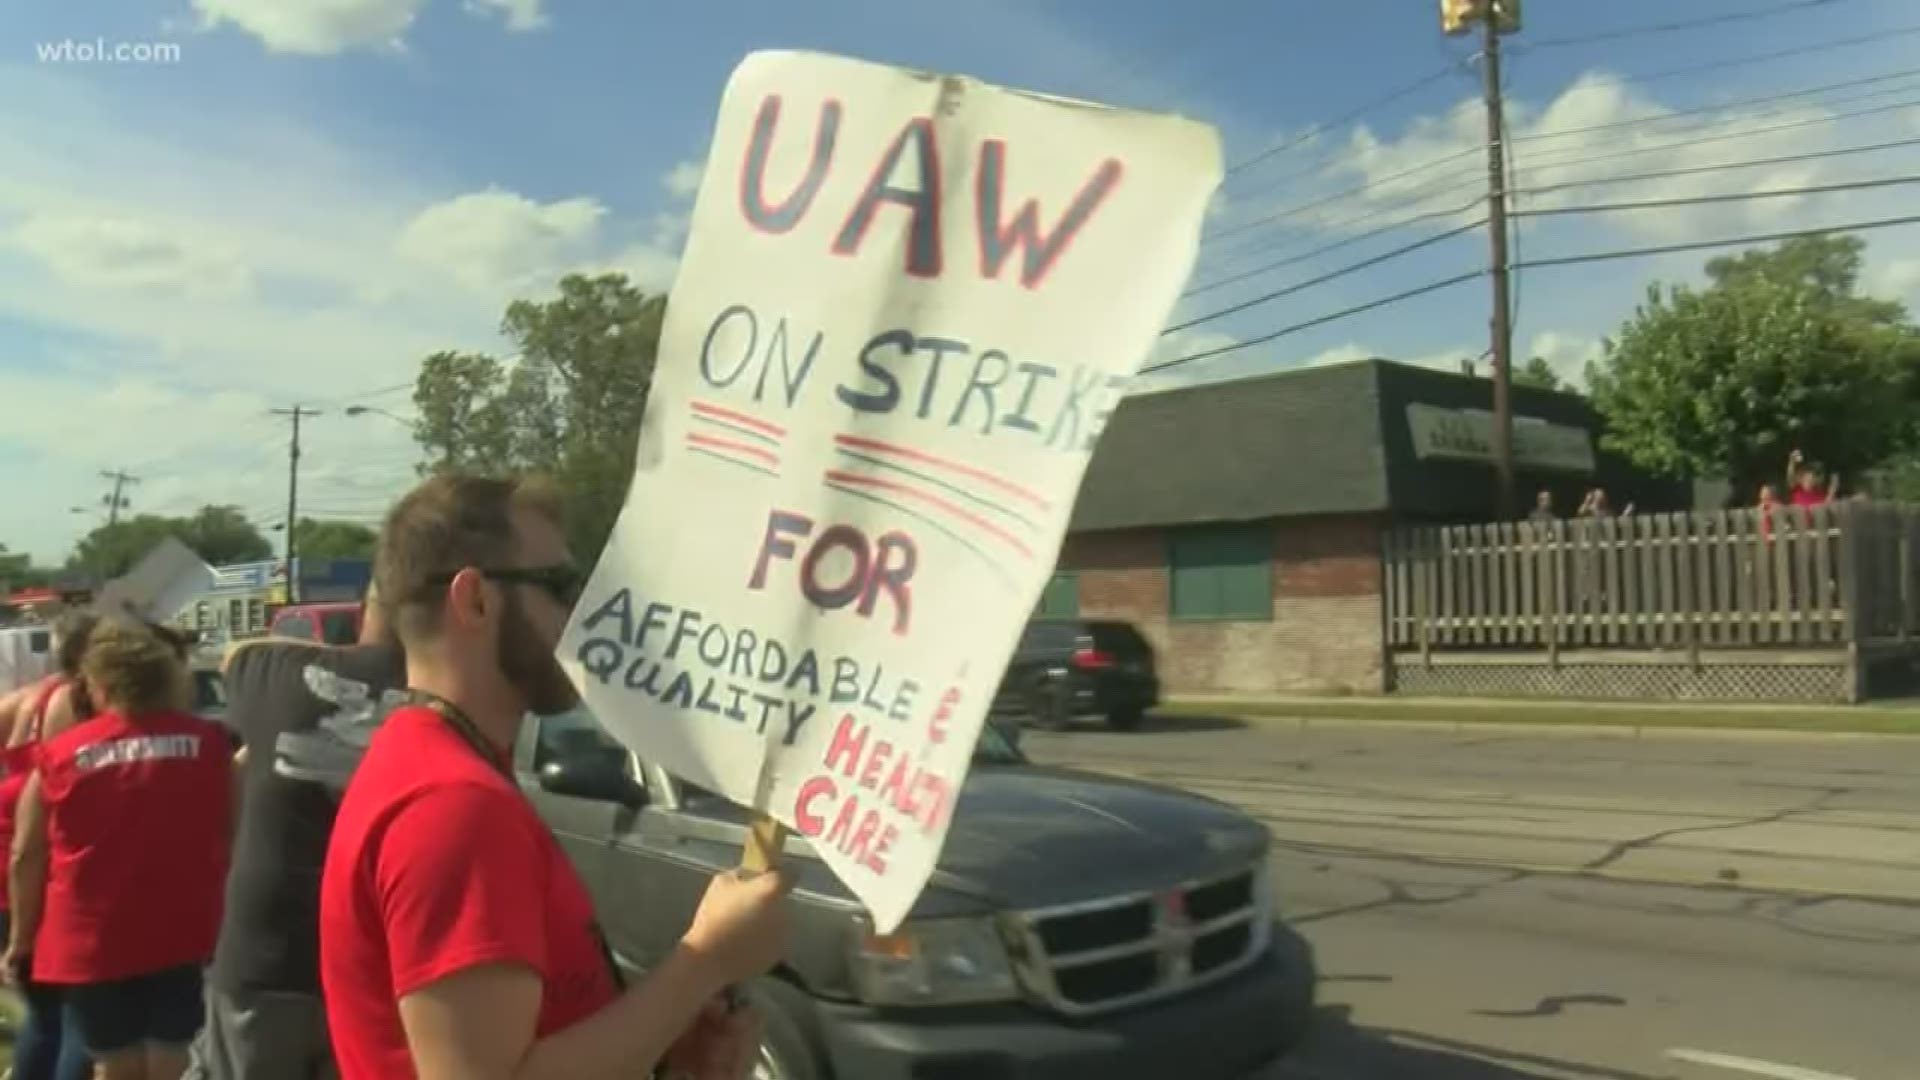 Week two of a planned strike of United Auto Workers union members of General Motors is now underway. UAW officials say the support of the community is important.